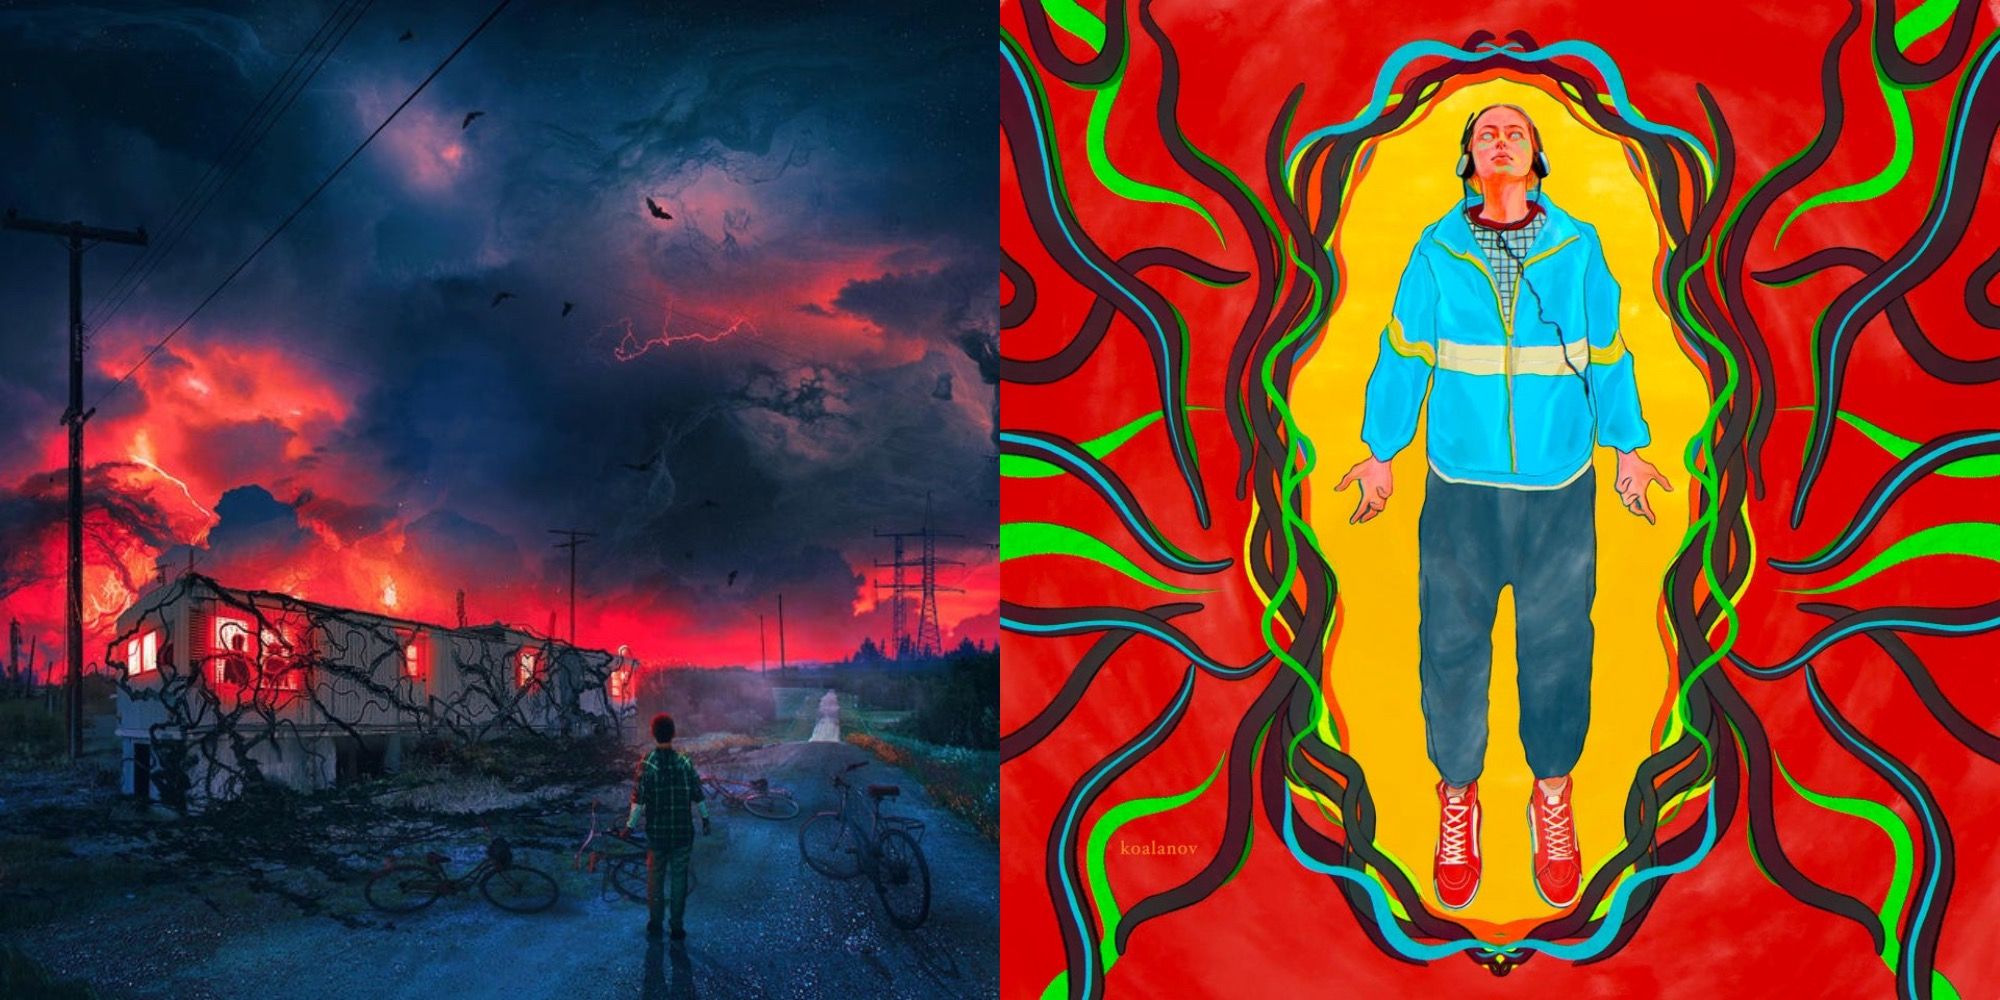 What Was Will Painting in 'Stranger Things'? (SPOILERS)